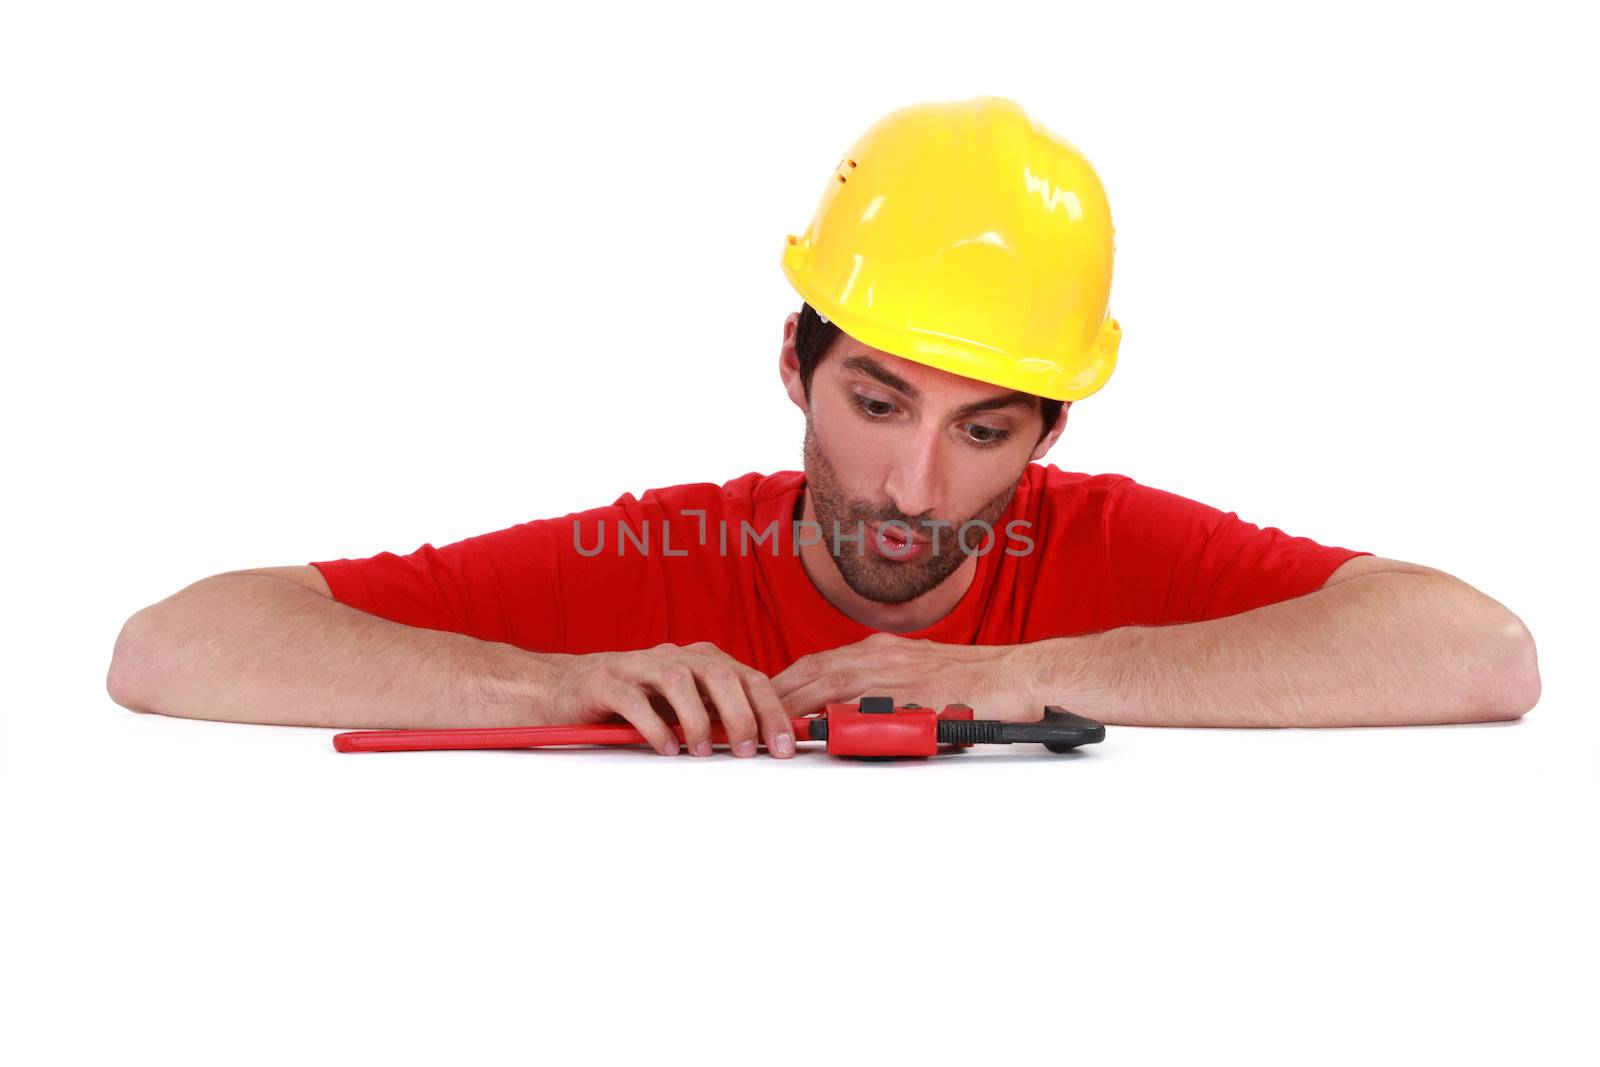 Plumber looking at his tool surprisingly by phovoir